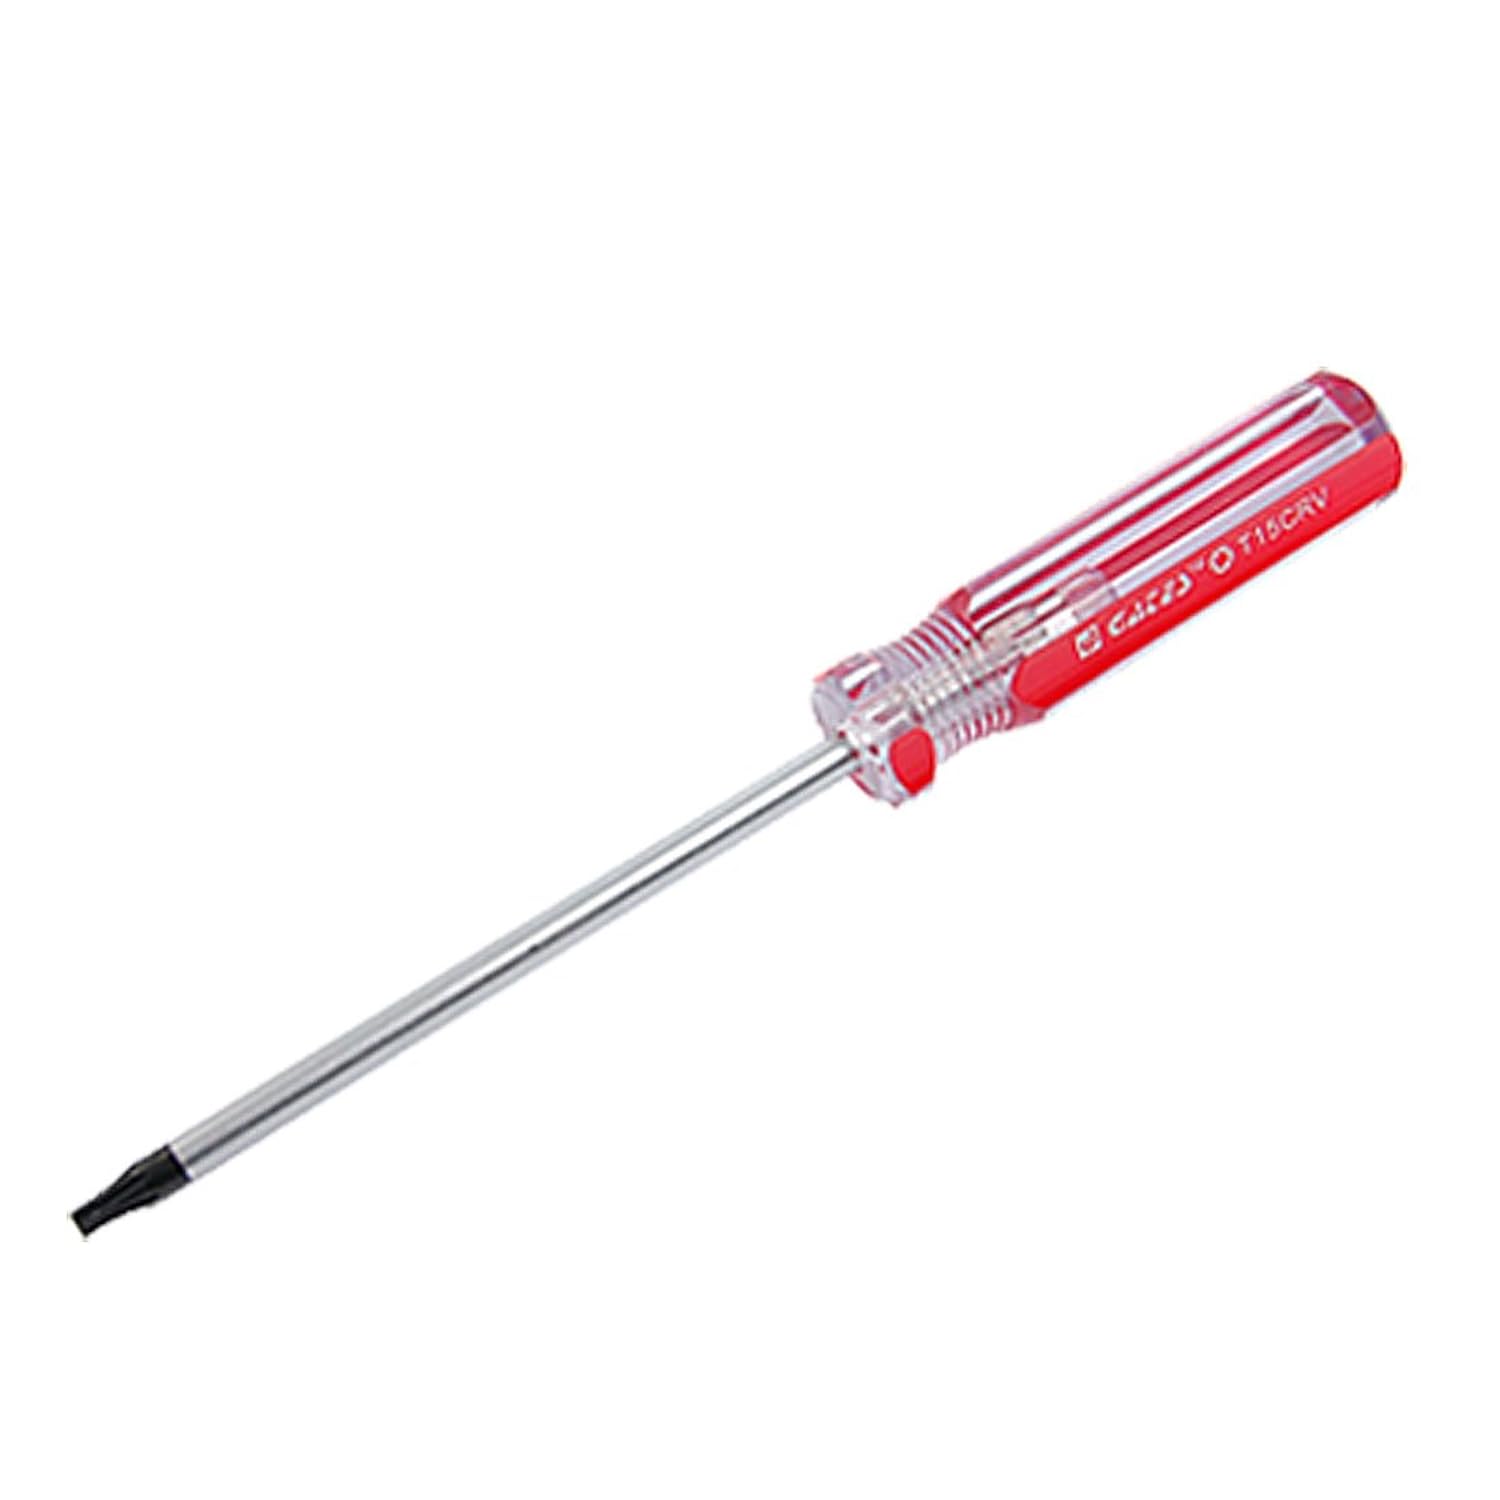 uxcell Torx Magnetic Screwdriver, T15 Security Star Screw Driver w 4 Inch CR-V Shaft and Clear Red Handle